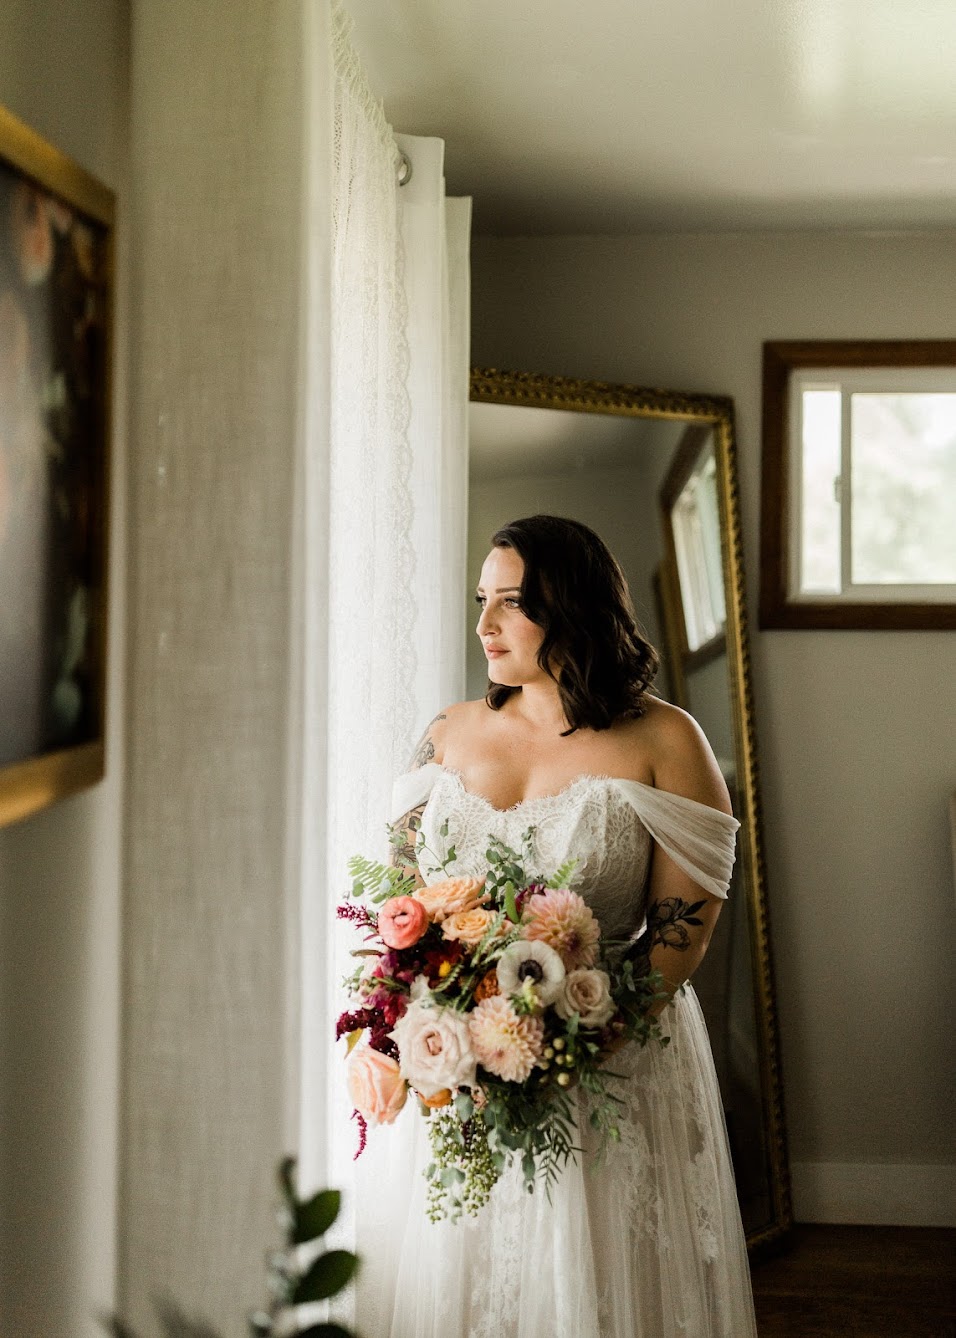 The bride all ready for her big day, staring out of the window while holding her florals wearing her wedding dress.